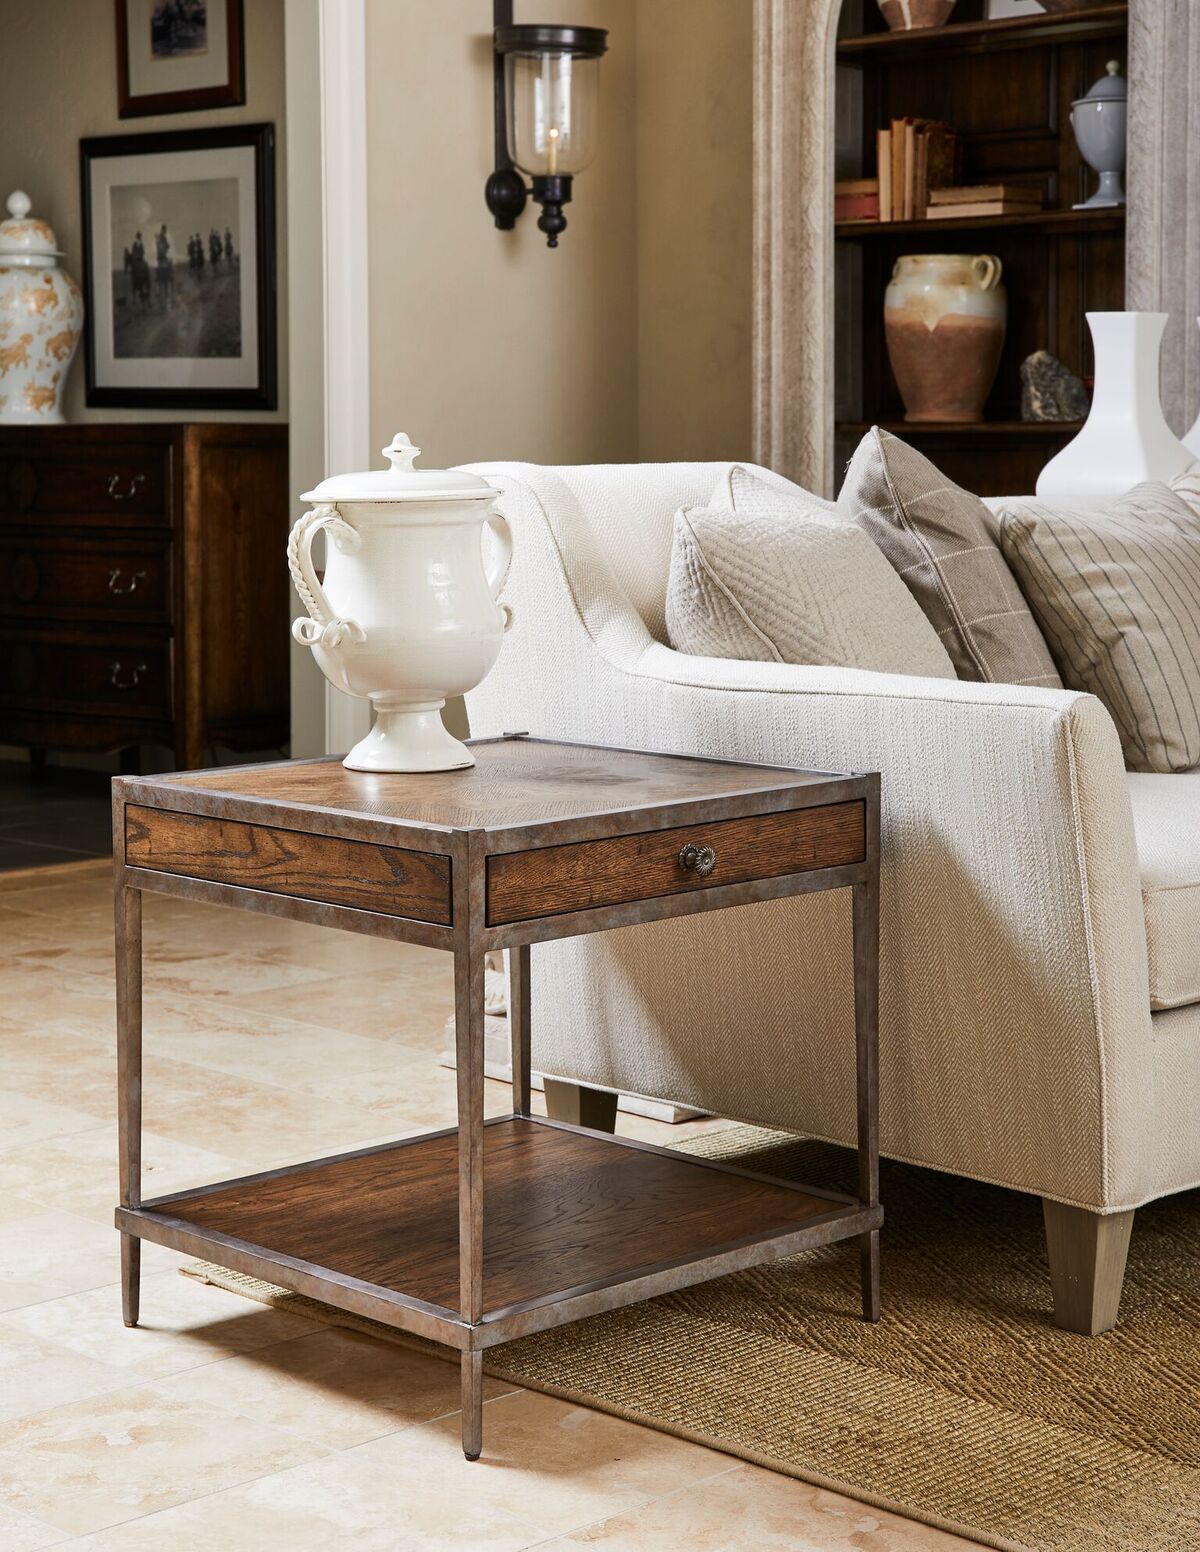 Thoroughbred Eclipse end table